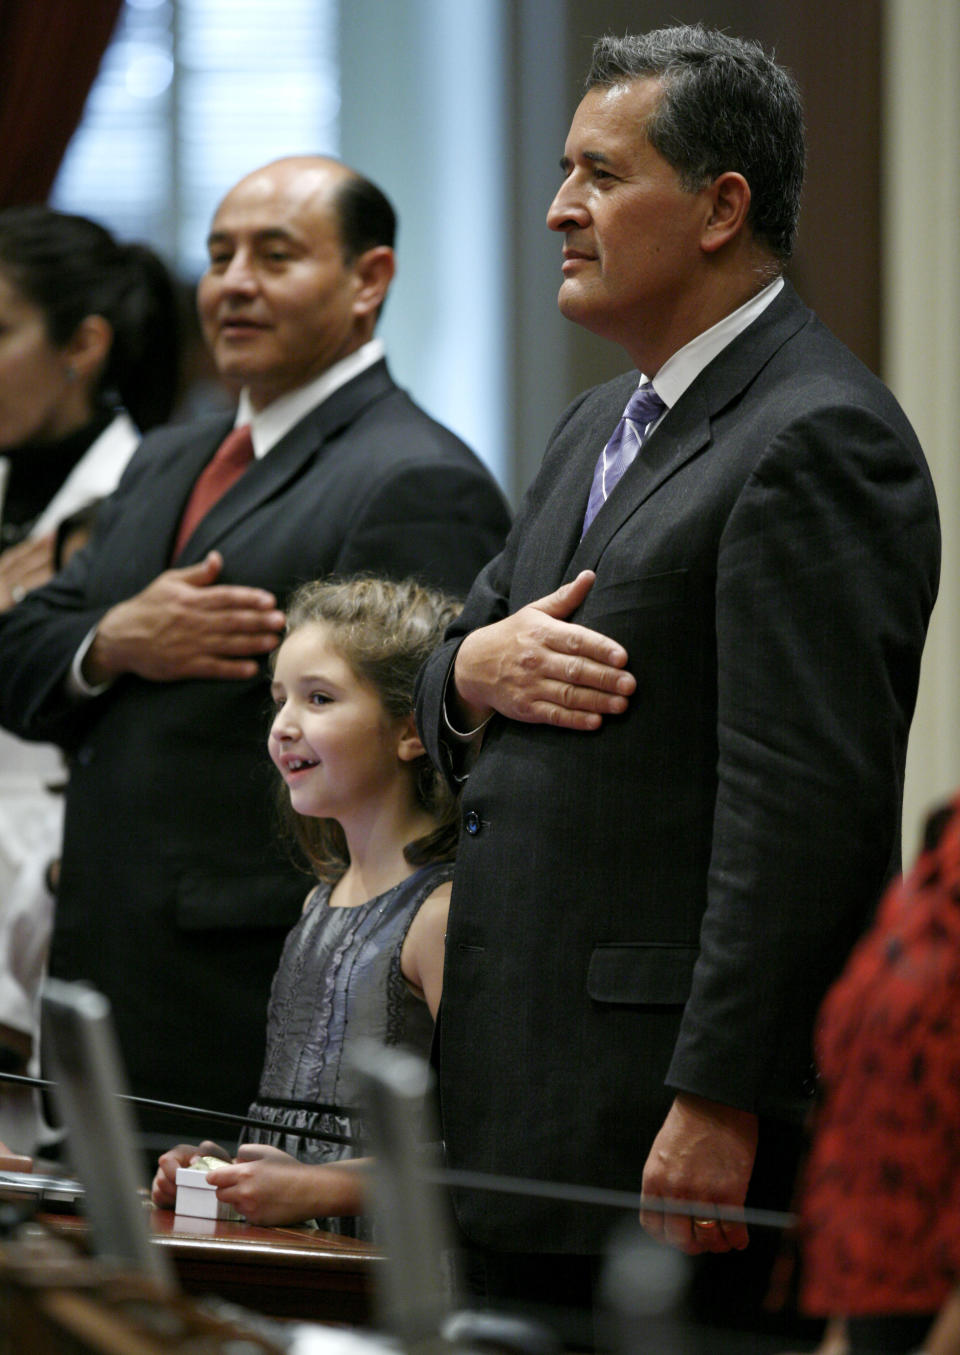 Then-State Sen. Juan Vargas, D-San Diego, right, and his daughter Helena, 7, stand for the Pledge of Alleglance before a swearing in ceremony for Senate members at the Capitol in Sacramento, Calif., on Monday, Dec. 6, 2010. (AP Photo/Steve Yeater) 